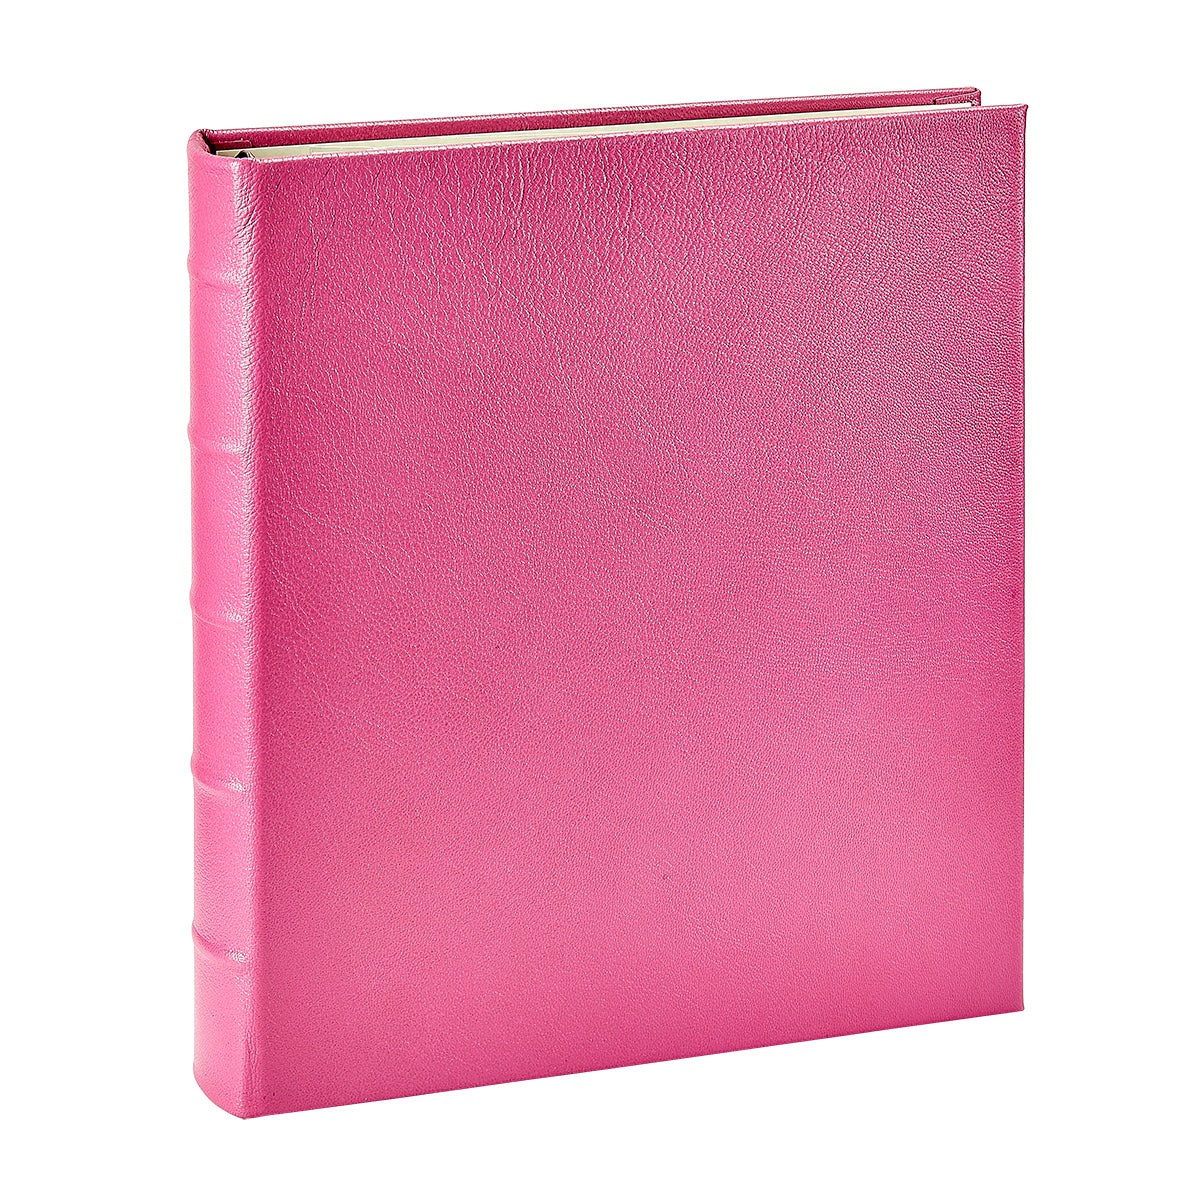 Graphic Image Large Ring Clear Pocket Album Pink Goatskin Leather